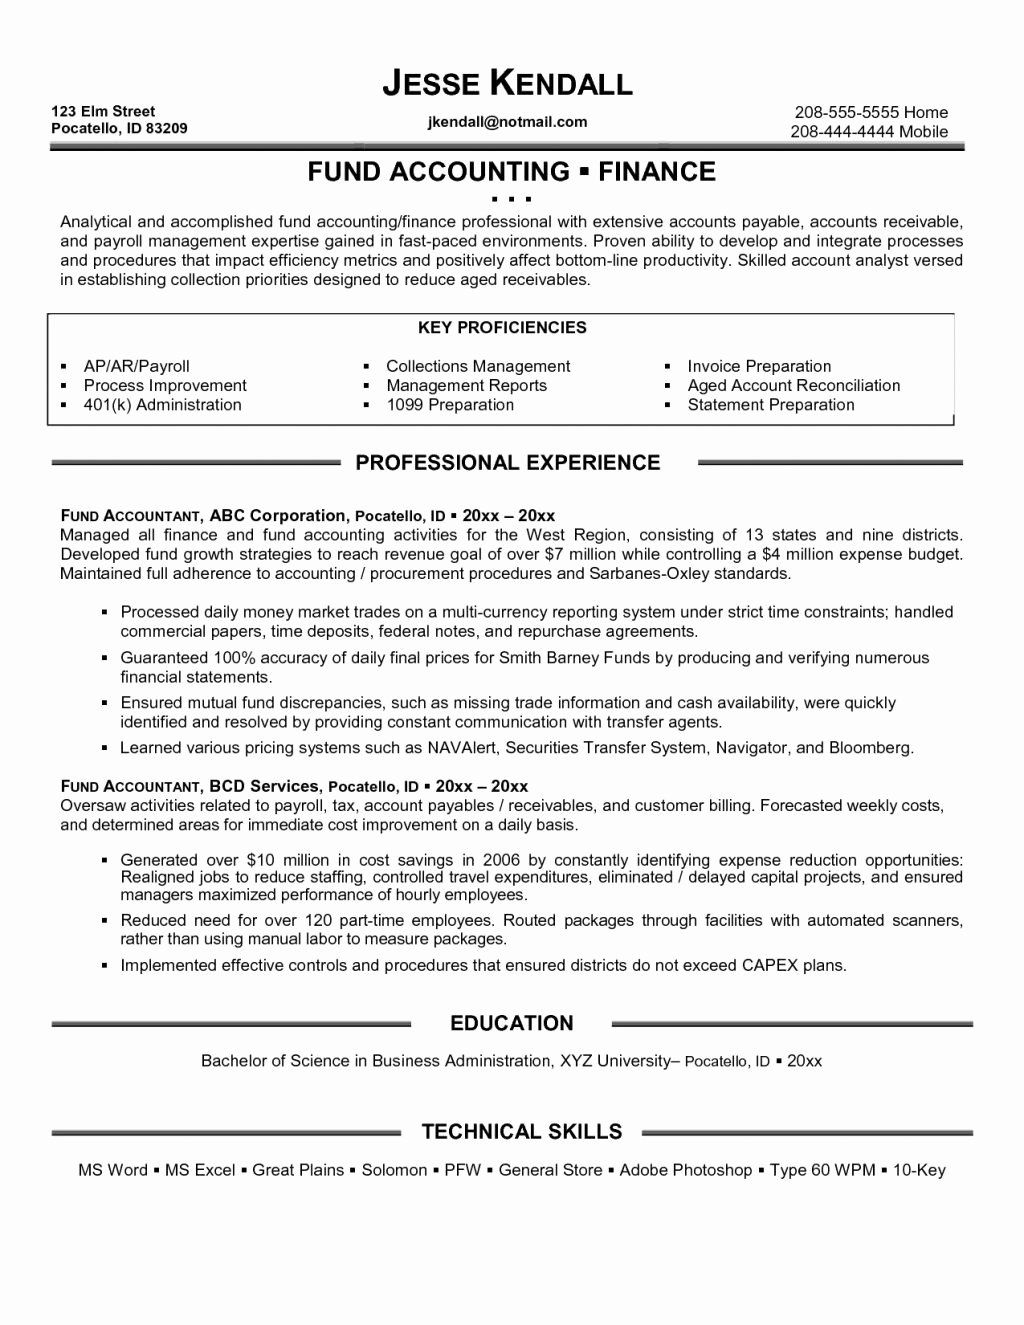 Staff Accounting Resume Samples Luxury Staff Accountant Salary Tag Fantastic Staff Accountant